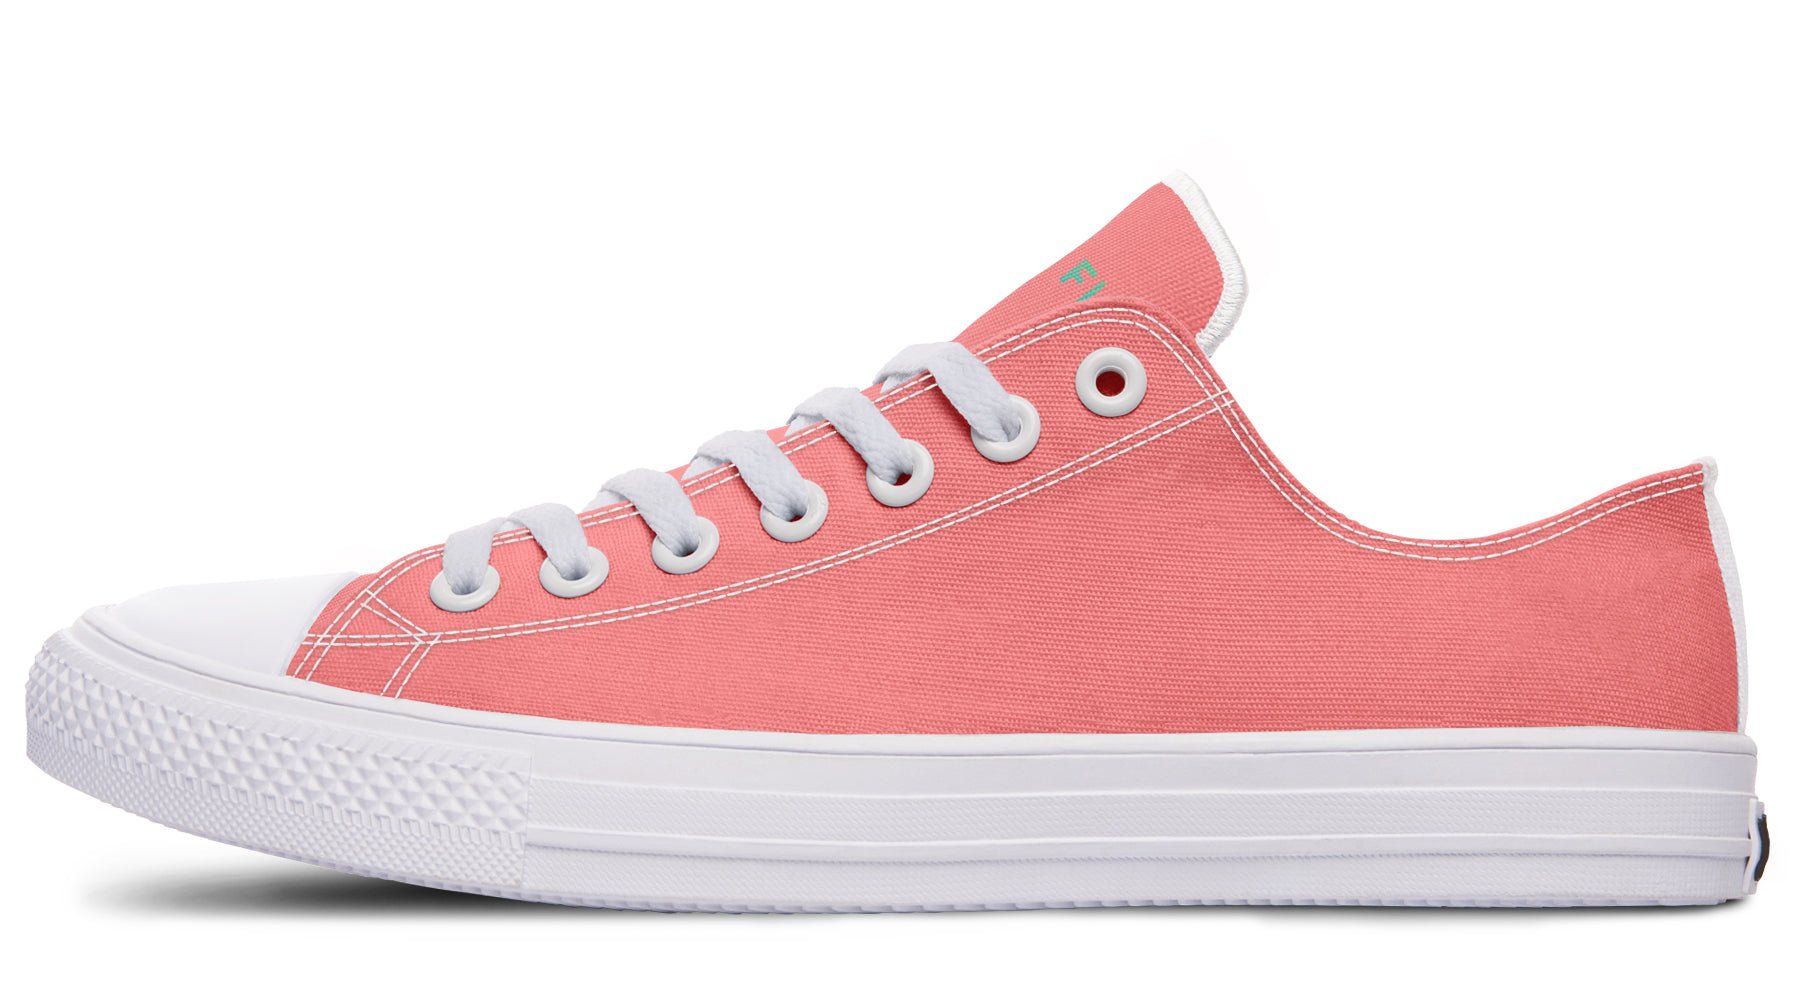 Unisex Low Tops Candyfloss Pink